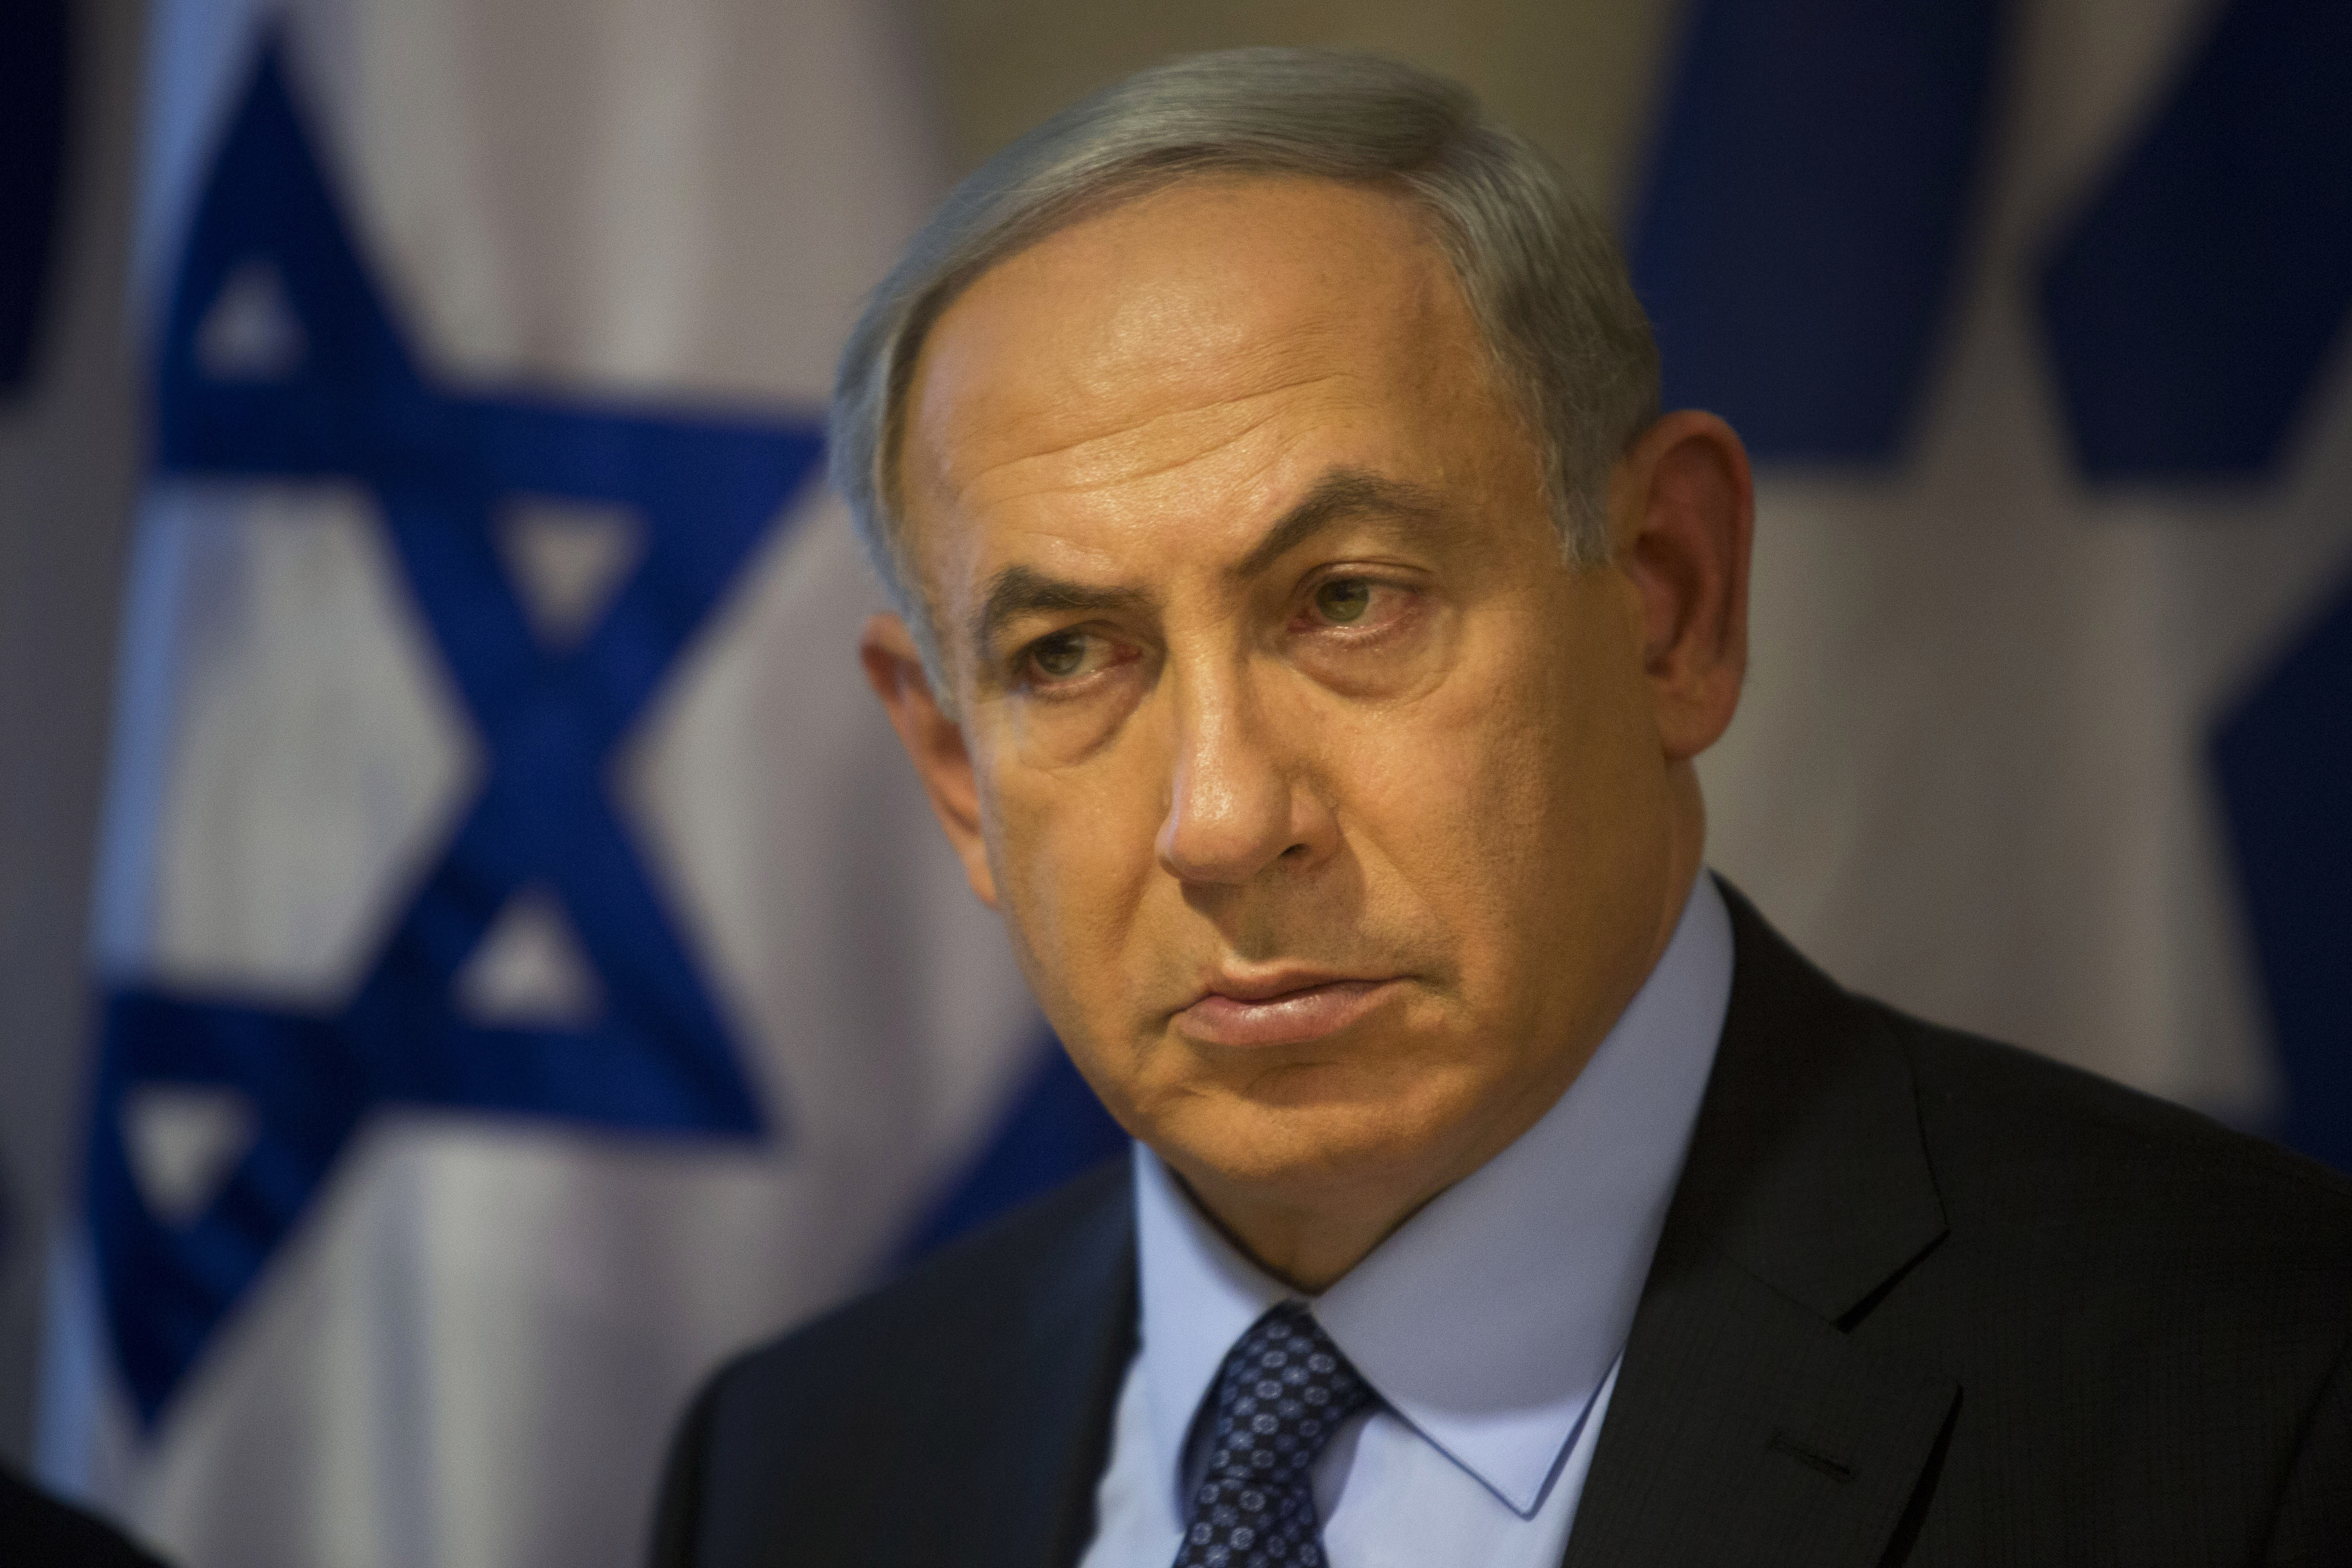 Israeli Prime Minister Benjamin Netanyahu looks on during a press conference at the Foreign Ministry in Jerusalem, Thursday, Oct. 15, 2015. Netanyahu on Thursday said he would be "perfectly open" to meeting with Palestinian President Mahmoud Abbas in order to end weeks of Israeli-Palestinian unrest. (AP Photo/Sebastian Scheiner)